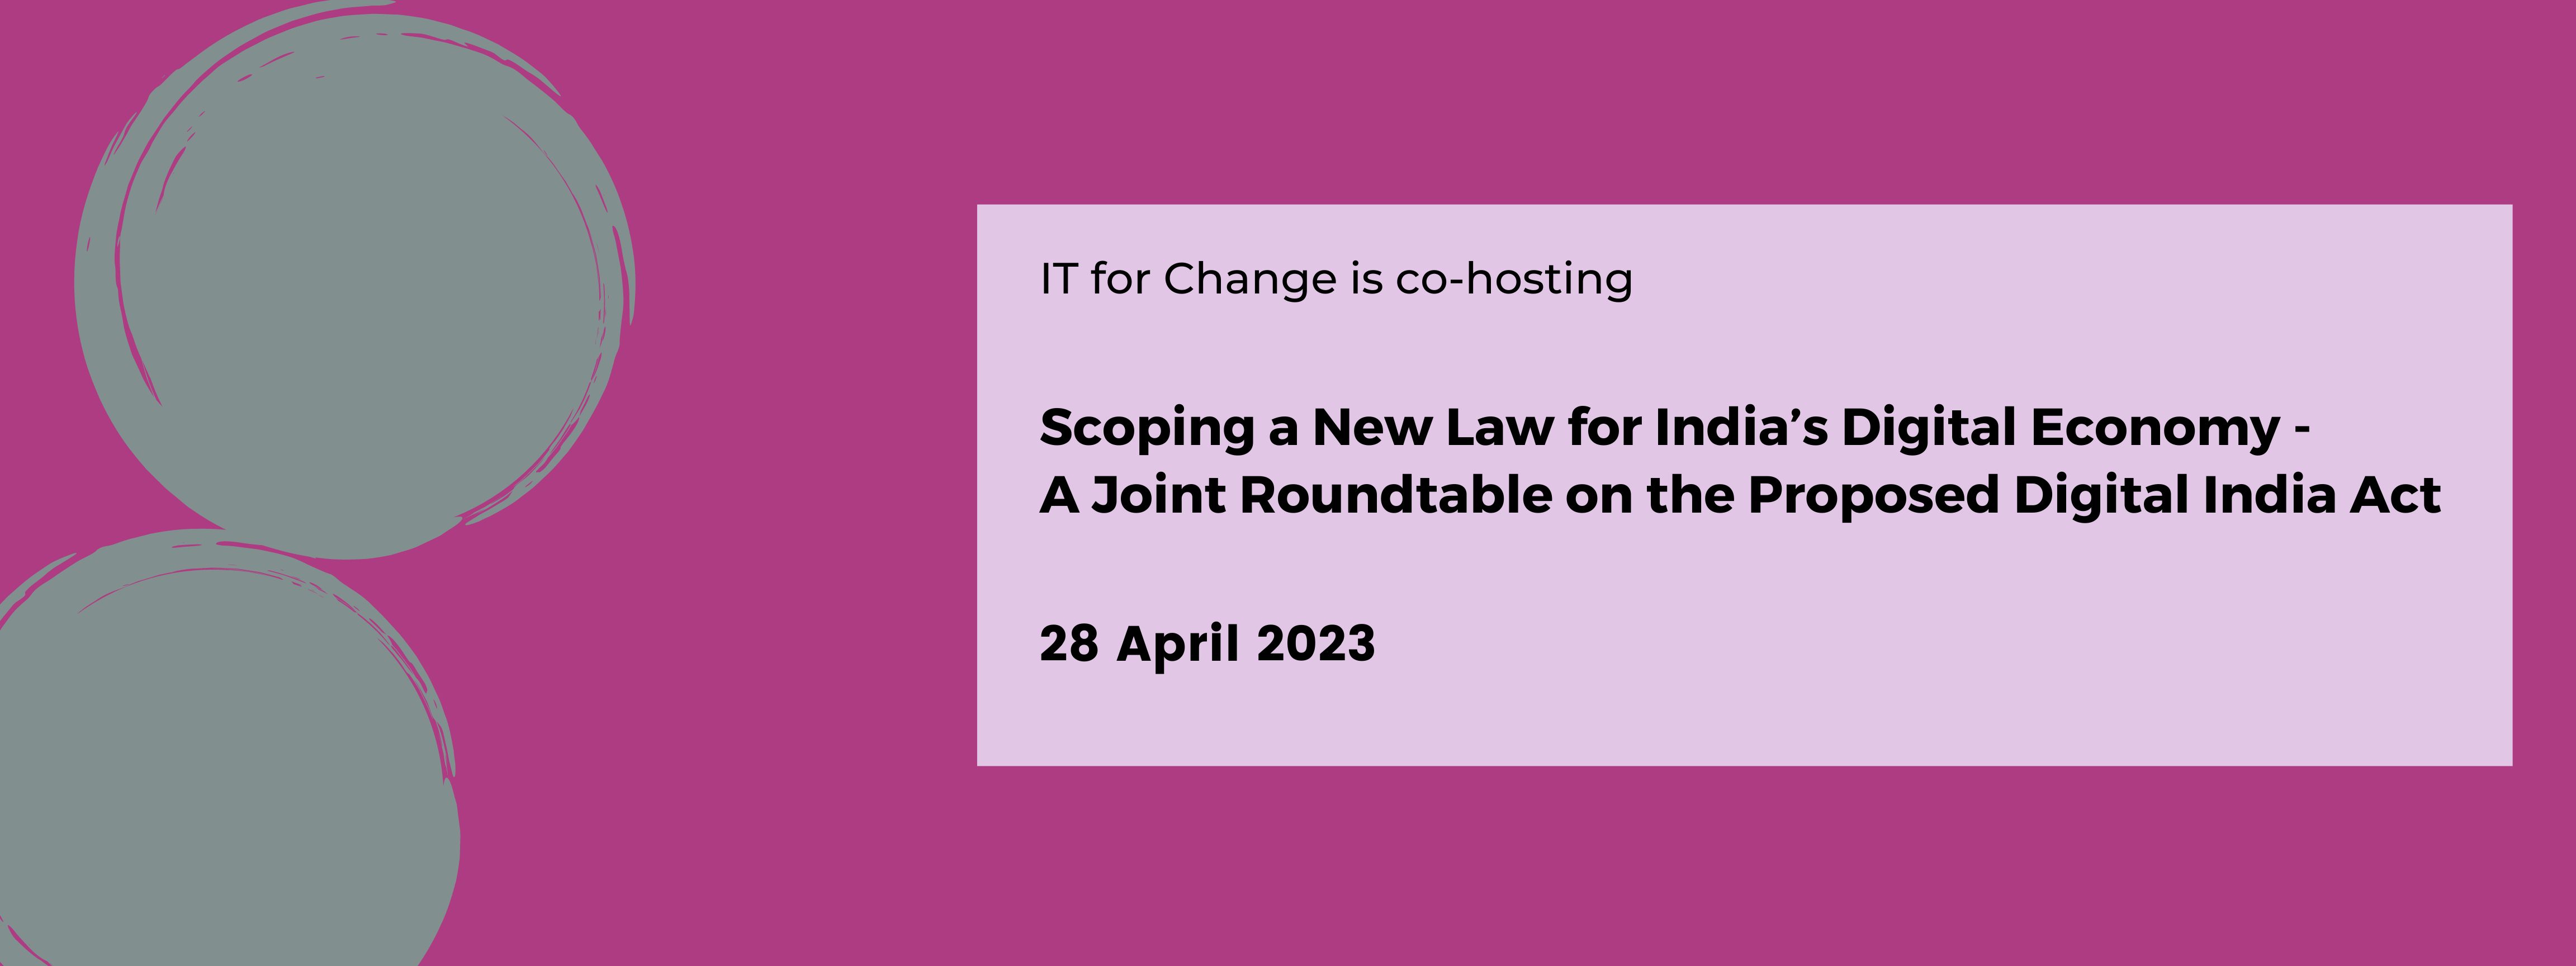 Scoping a New Law for India’s Digital Economy - A Joint Roundtable on the Proposed Digital India Act